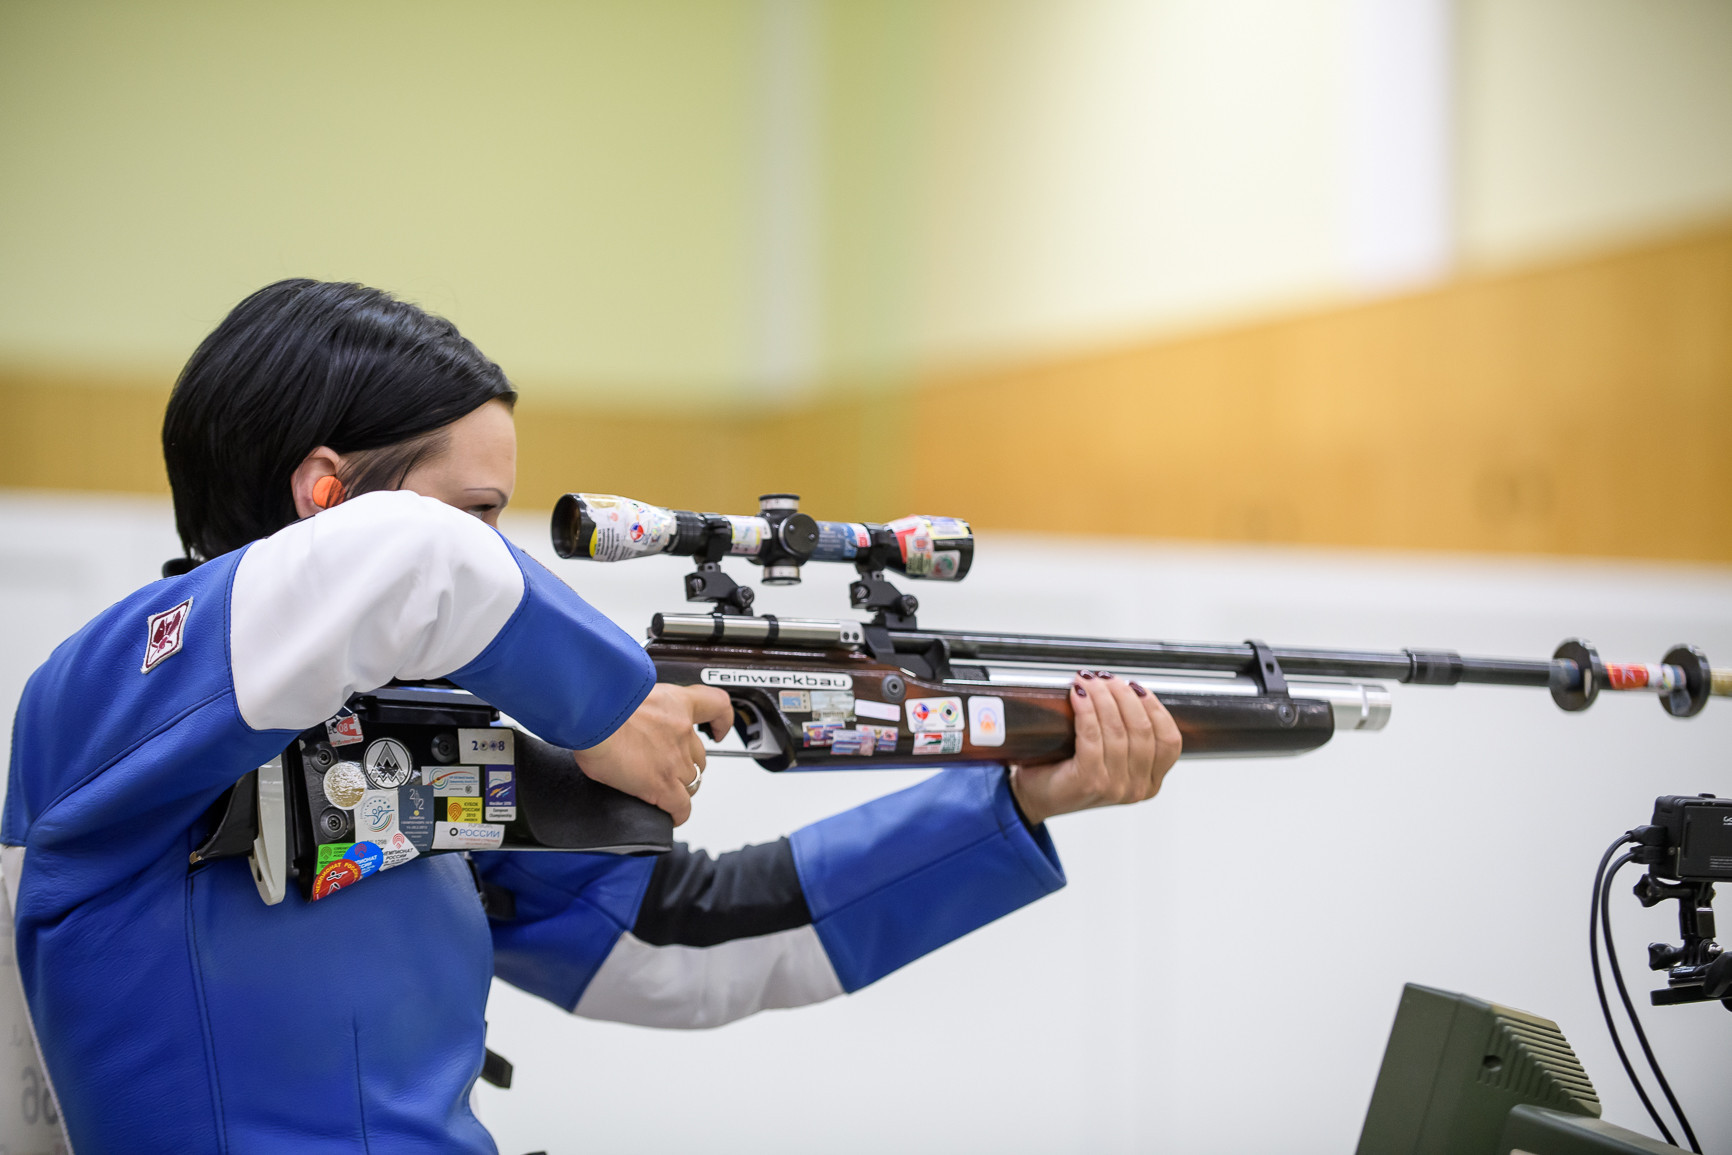 Julia Eydenzon secured Russia's first gold medal of the European Shooting Championships ©ISSF/Flickr